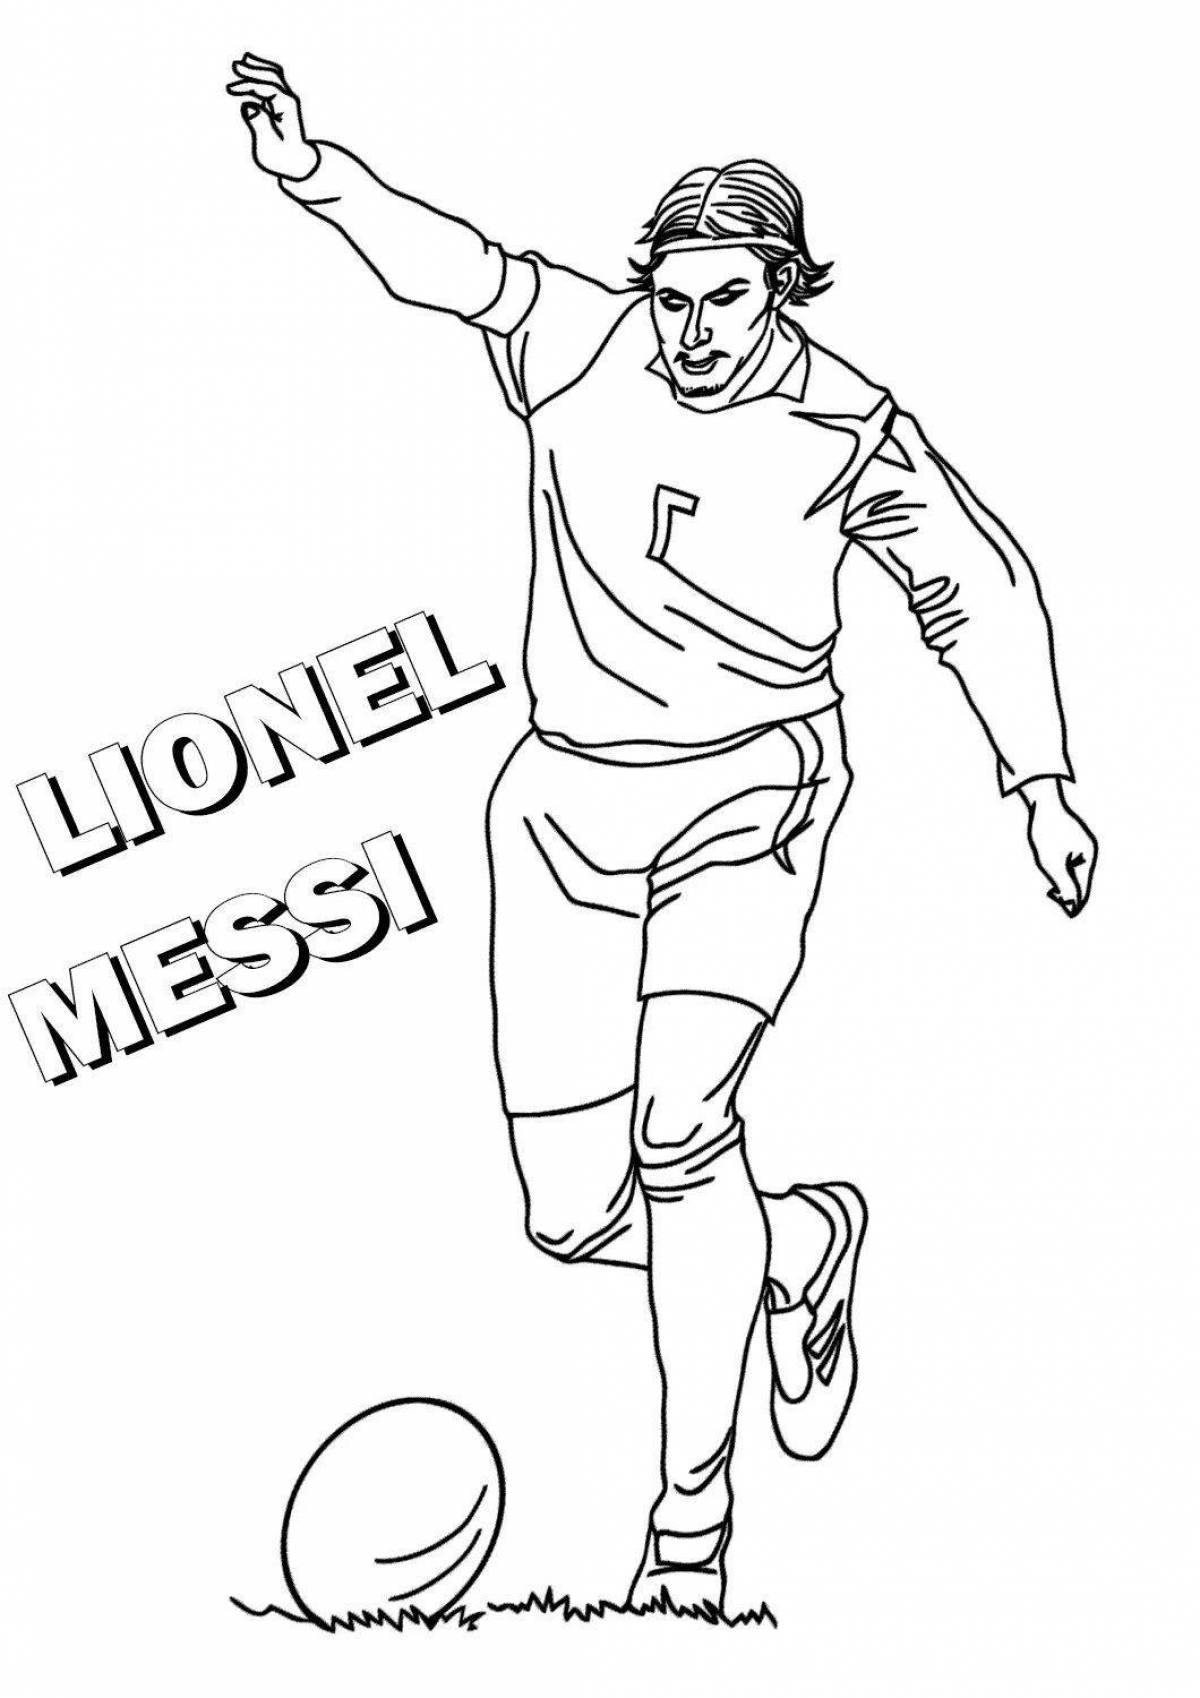 Merry messi argentina coloring book